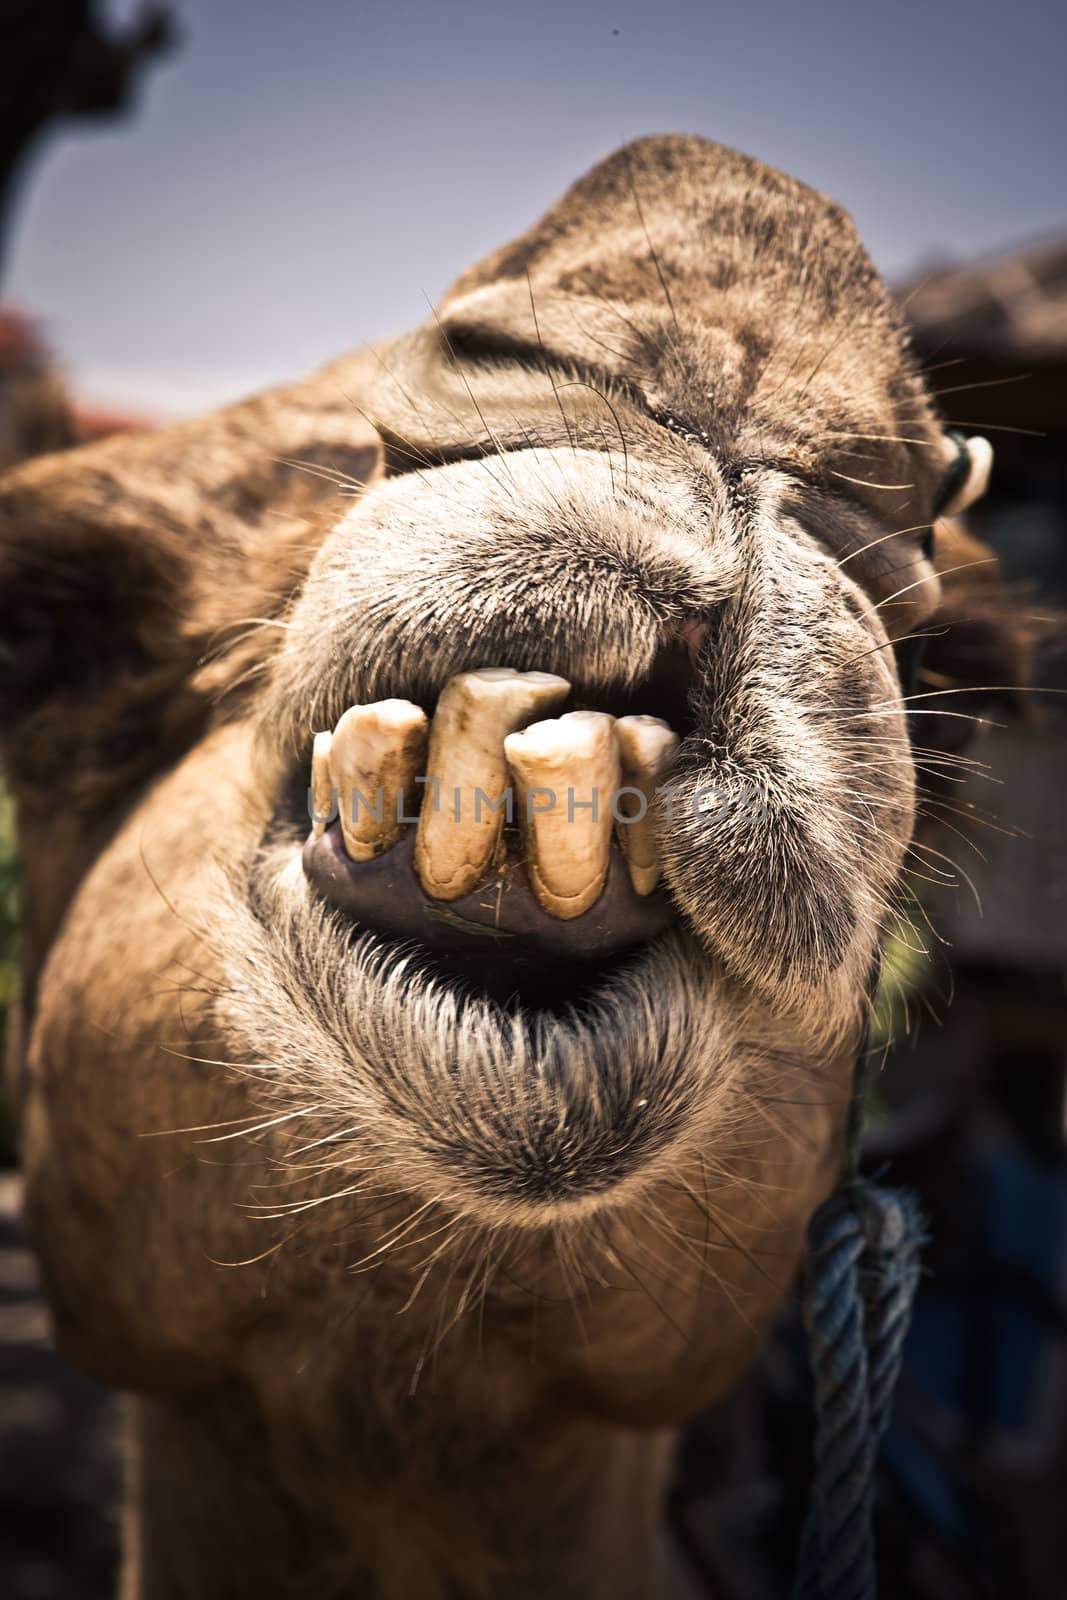 Humorous camel with bad teeth by jrstock